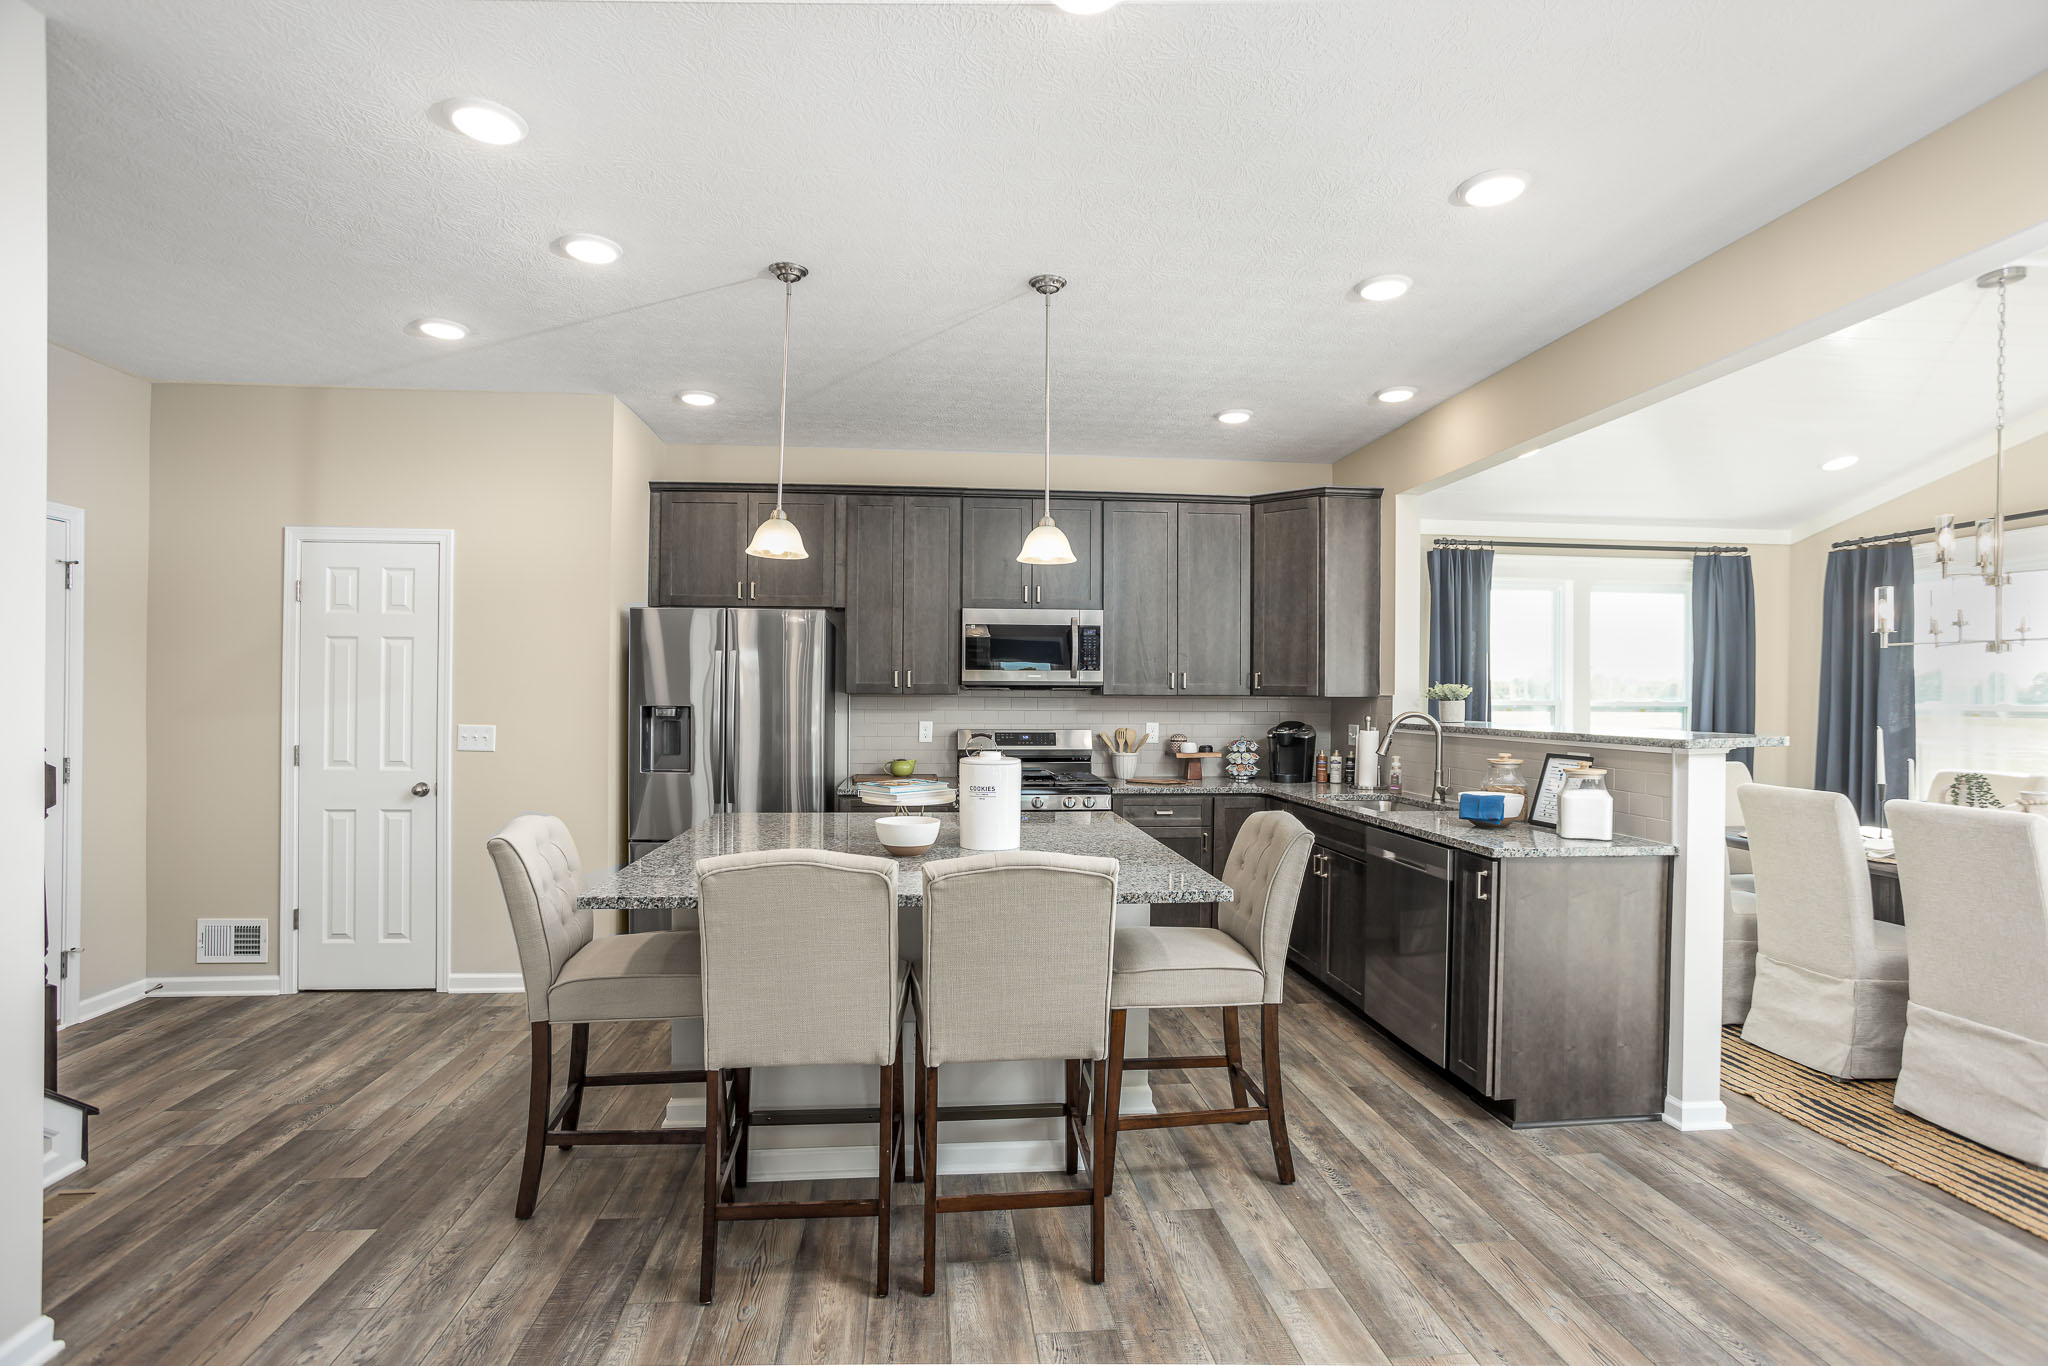 View of kitchen with island and breakfast nook in Irwin, PA